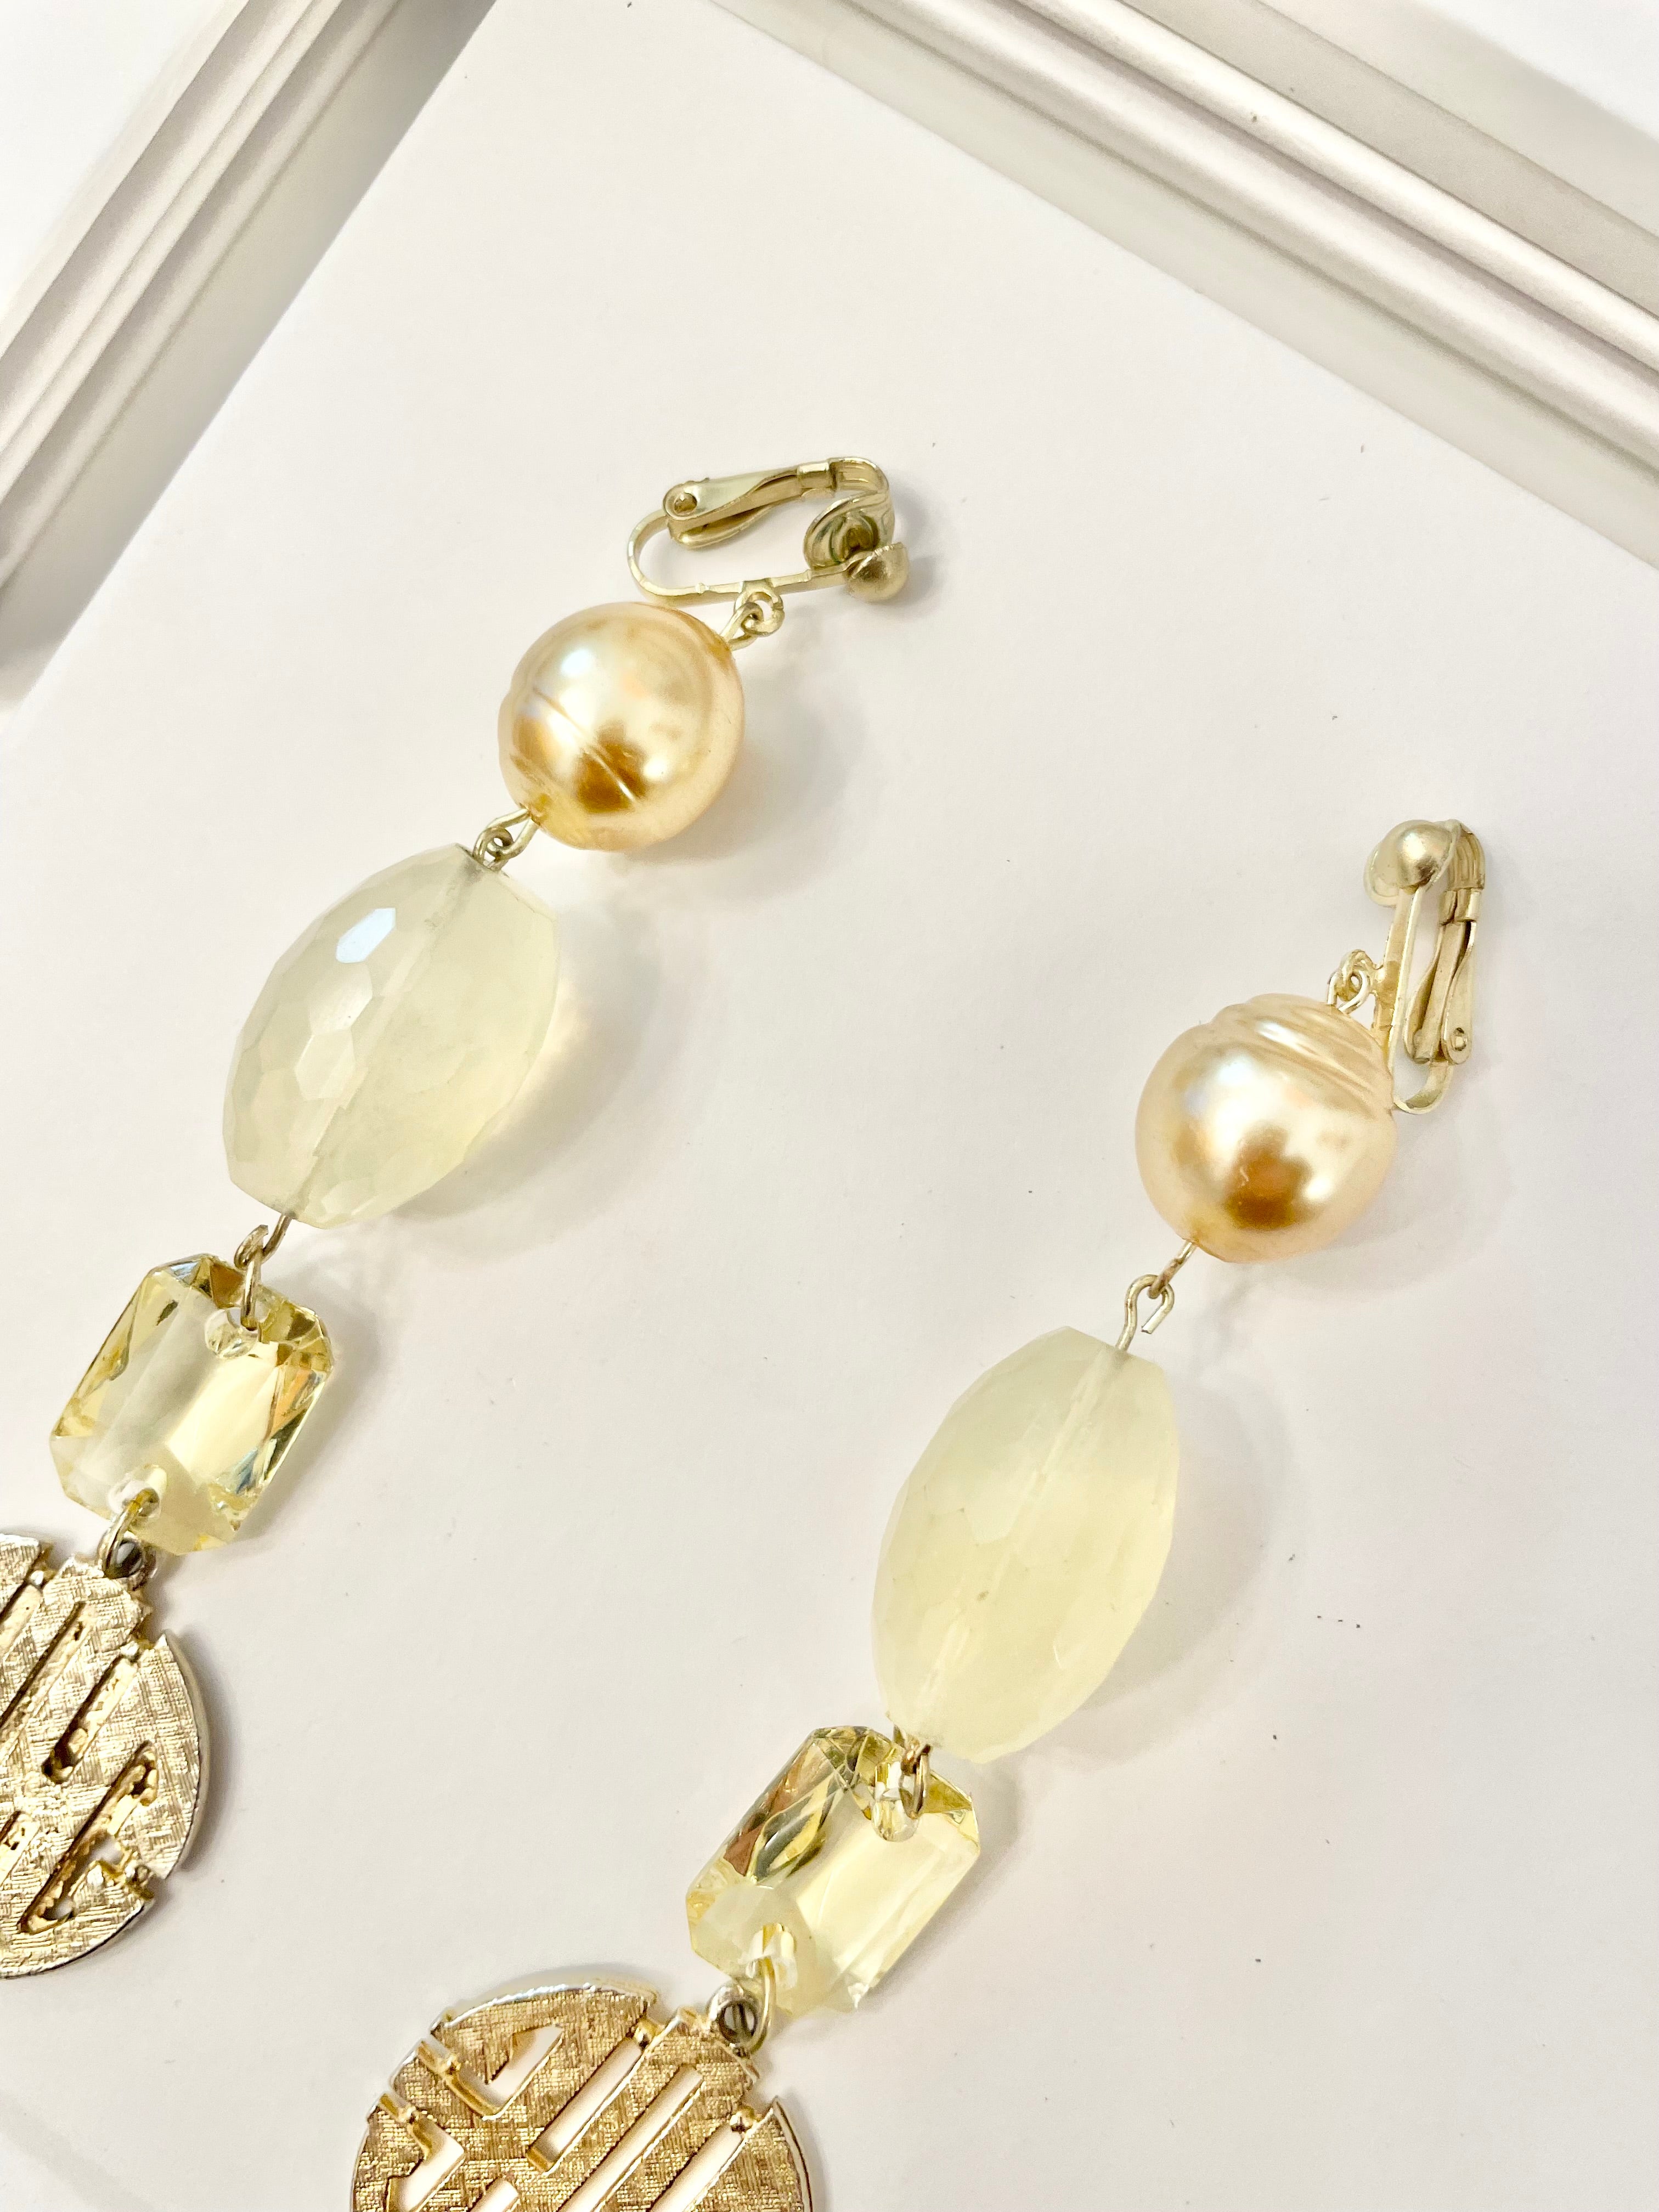 Vintage showstopper earrings... so divine! Lemon and pearls..Oh my